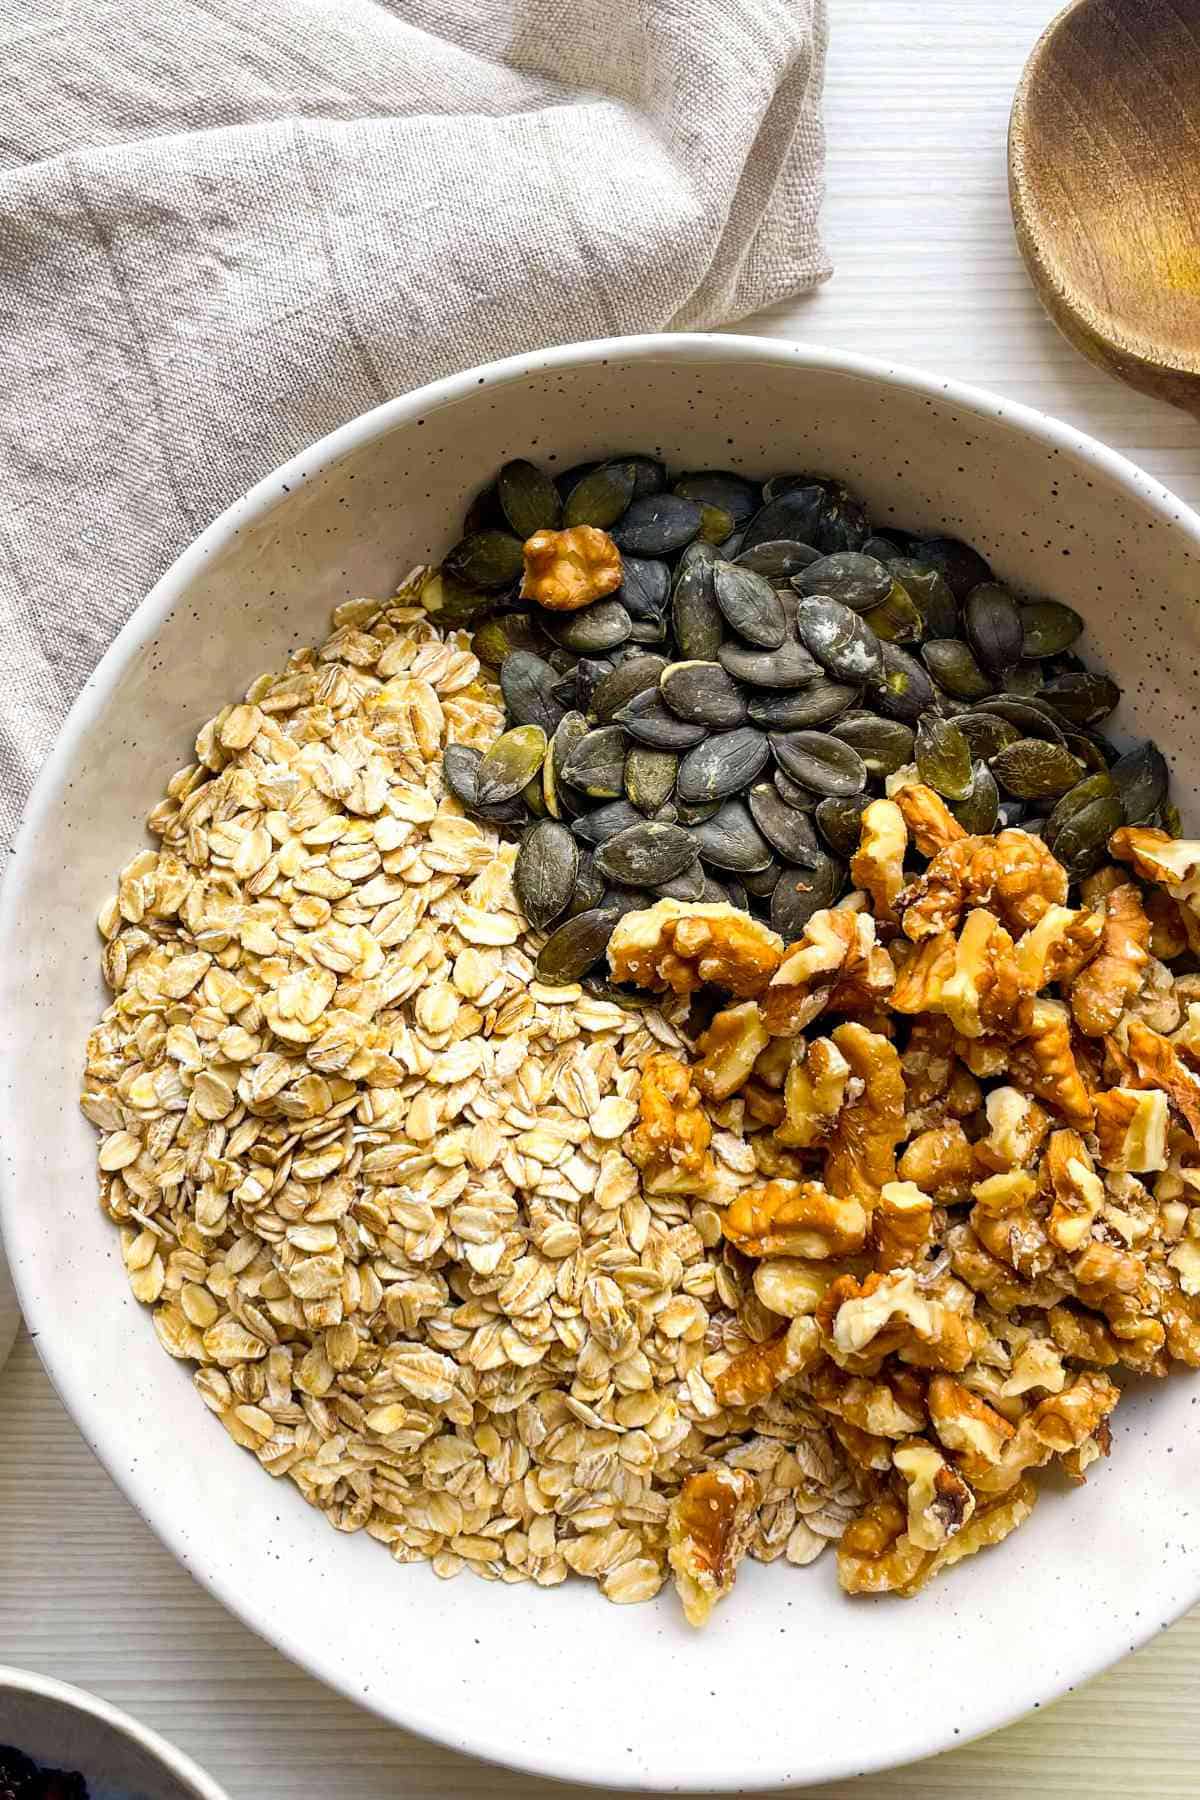 nuts added to bowl of oats and pumpkin seeds.